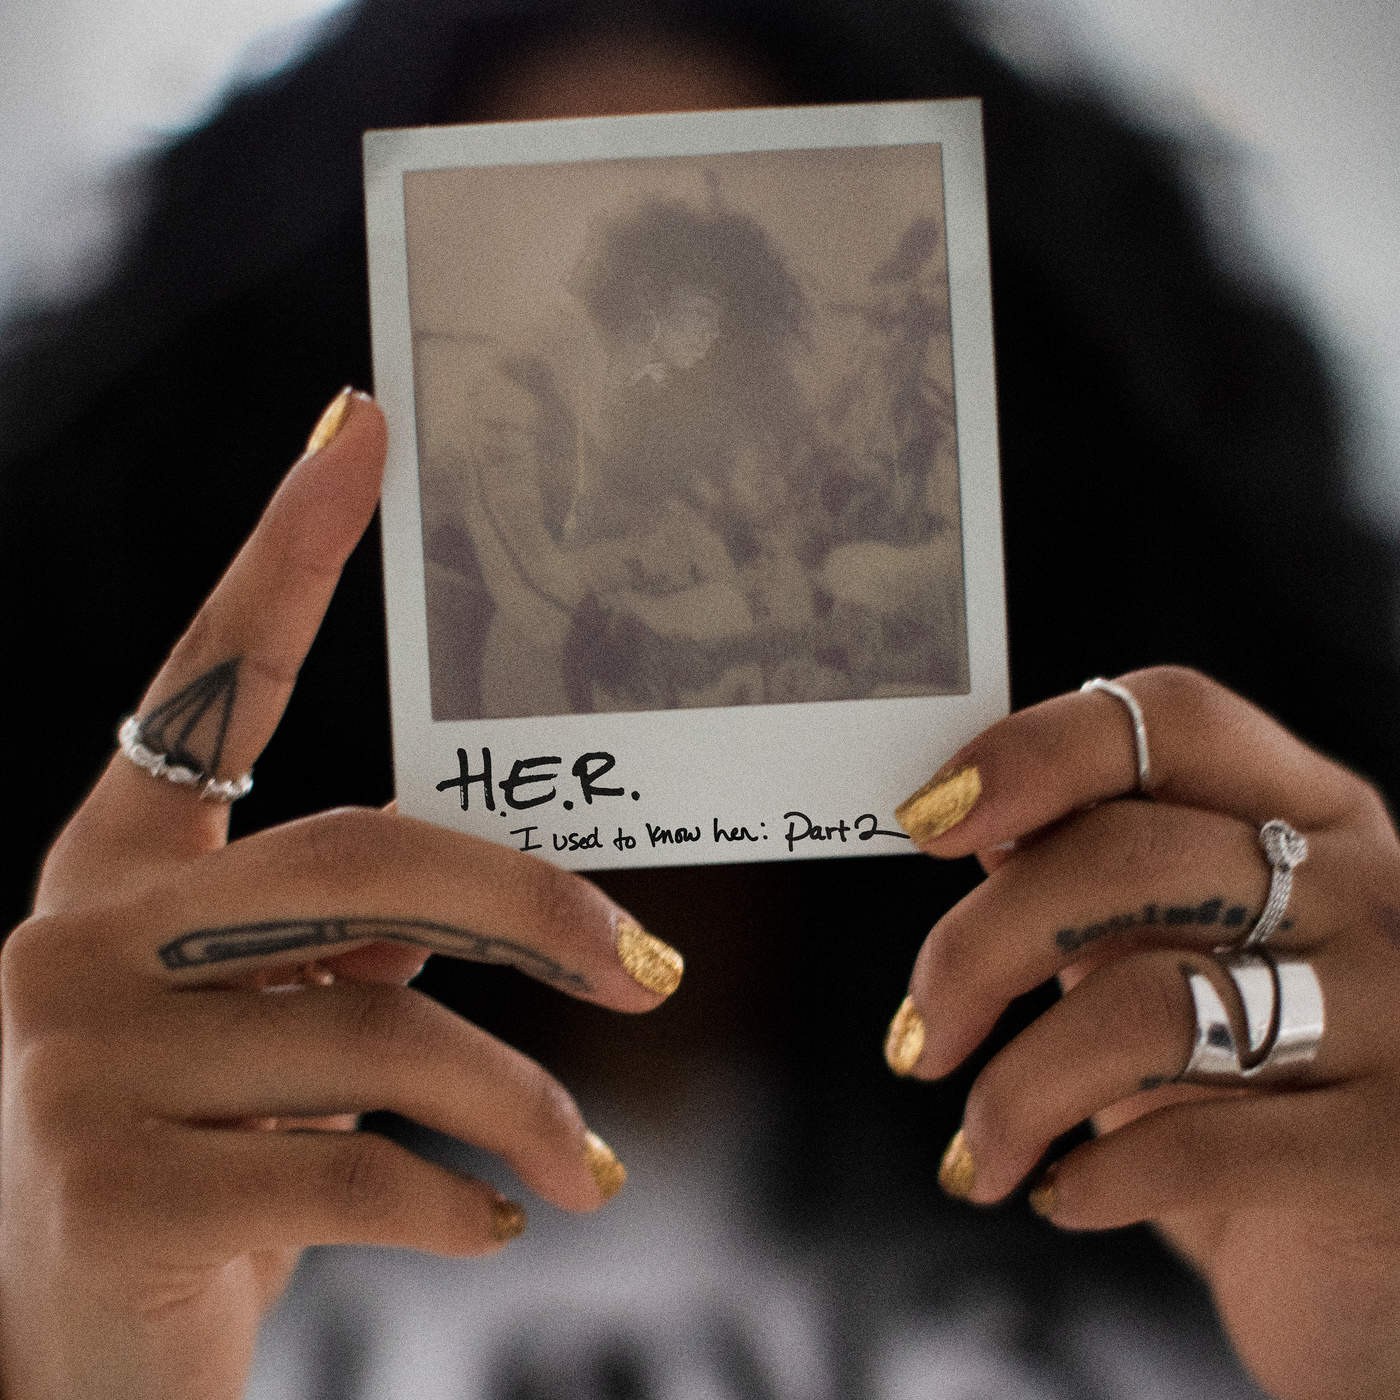 New Music: H.E.R. - I Used to Know Her: Part 2 (EP)